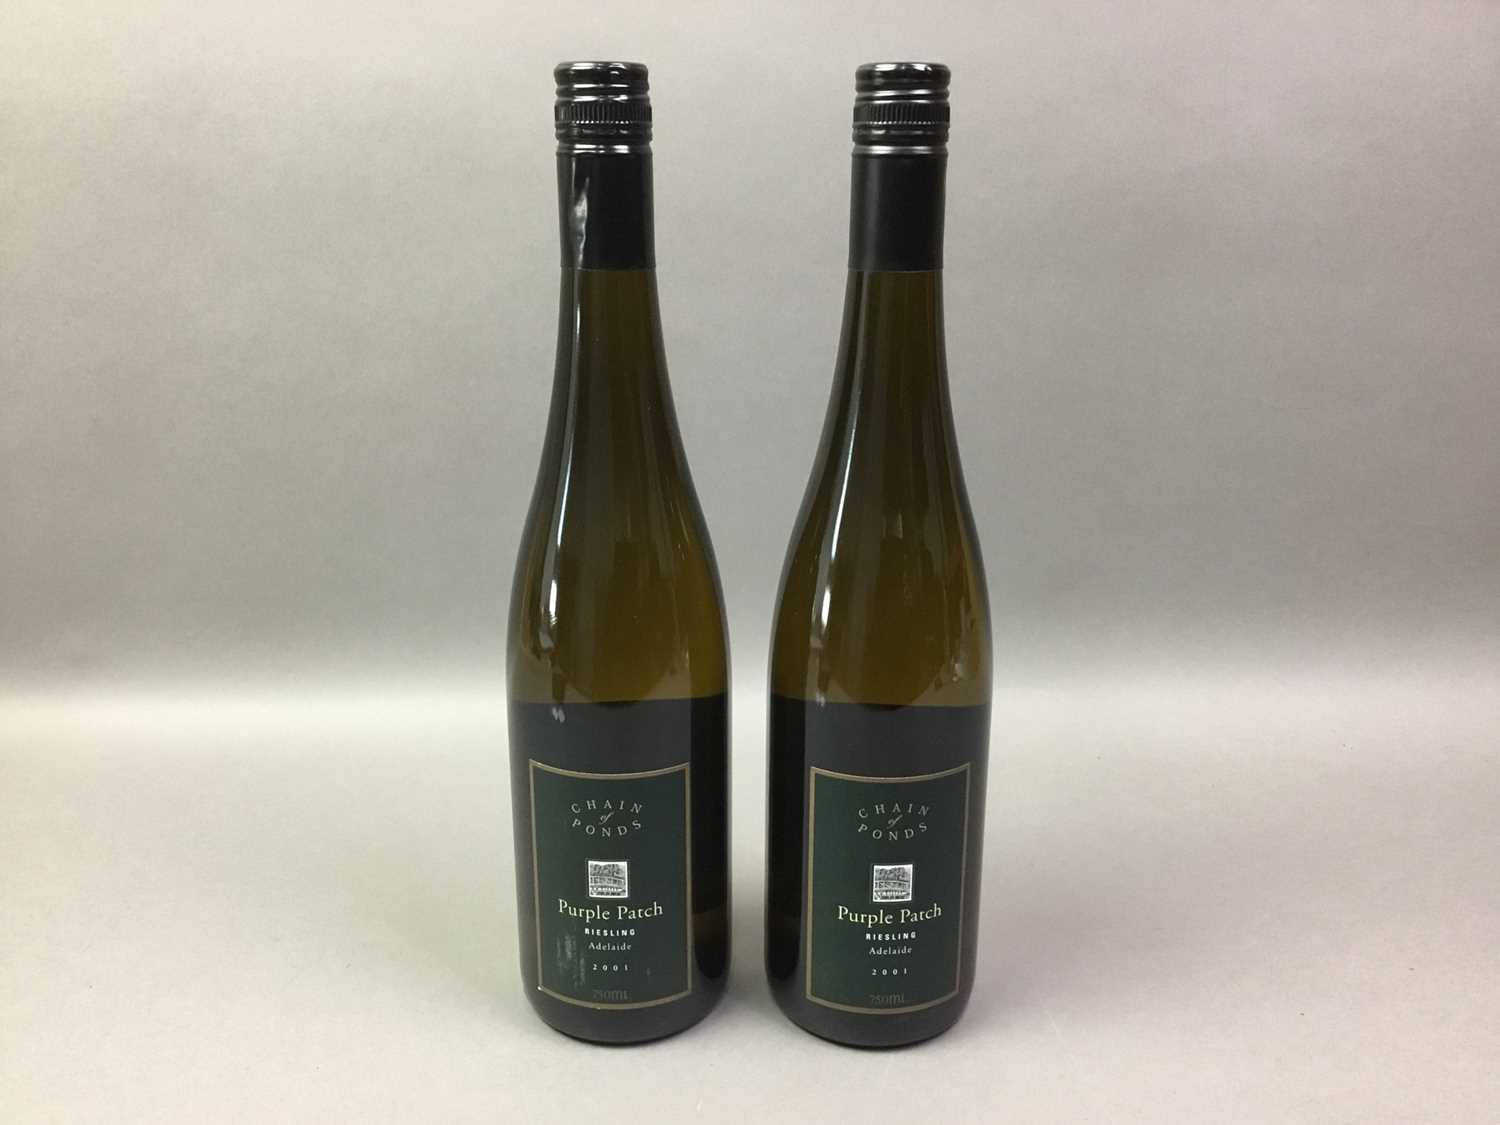 TWO BOTTLES OF CHAIN OF PONDS 2001 'PURPLE PATCH' RIESLING AUSTRALIAN WHITE WINE